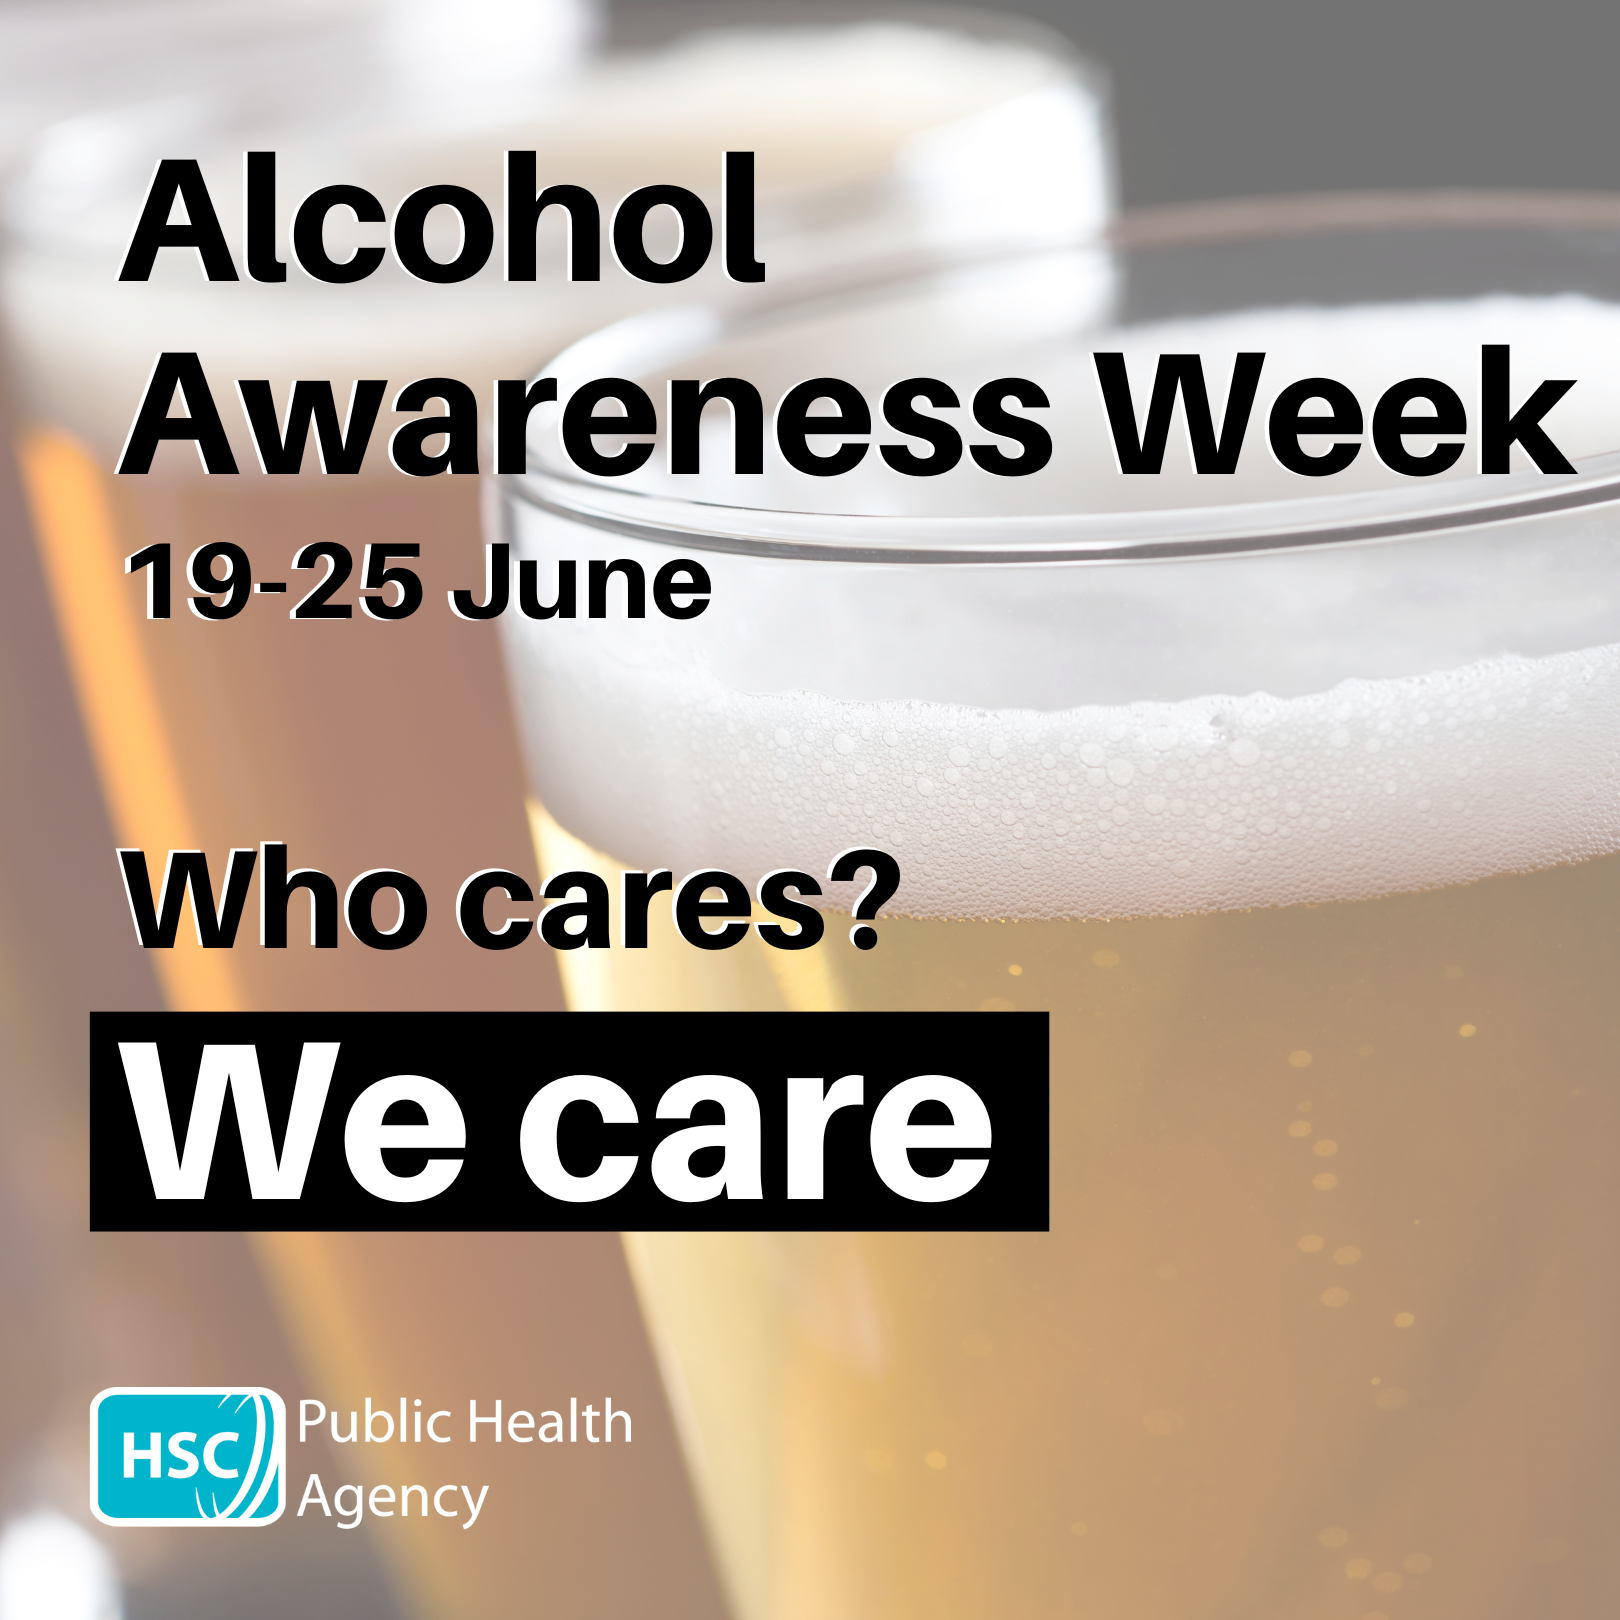 image of pints of beer and text says: "Alcohol Awareness Week 19-25 June. Who cares? We care." With the PHA logo